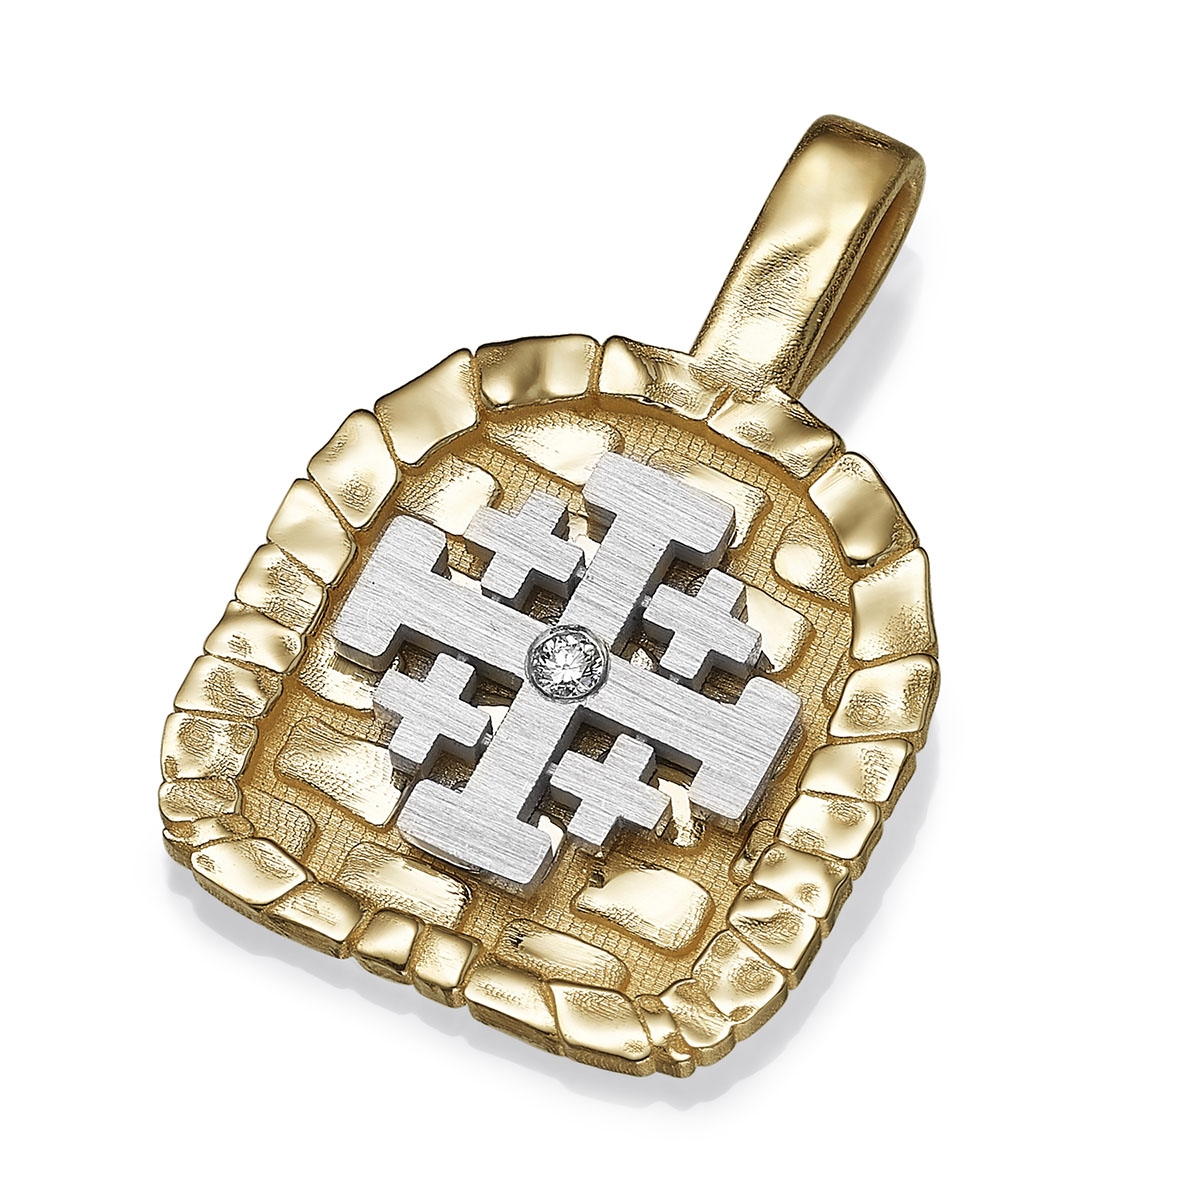 Yaniv Fine Jewelry Canaan Collection: 18K Gold Arched Gate Jerusalem Cross Pendant with Diamond Accent - 1